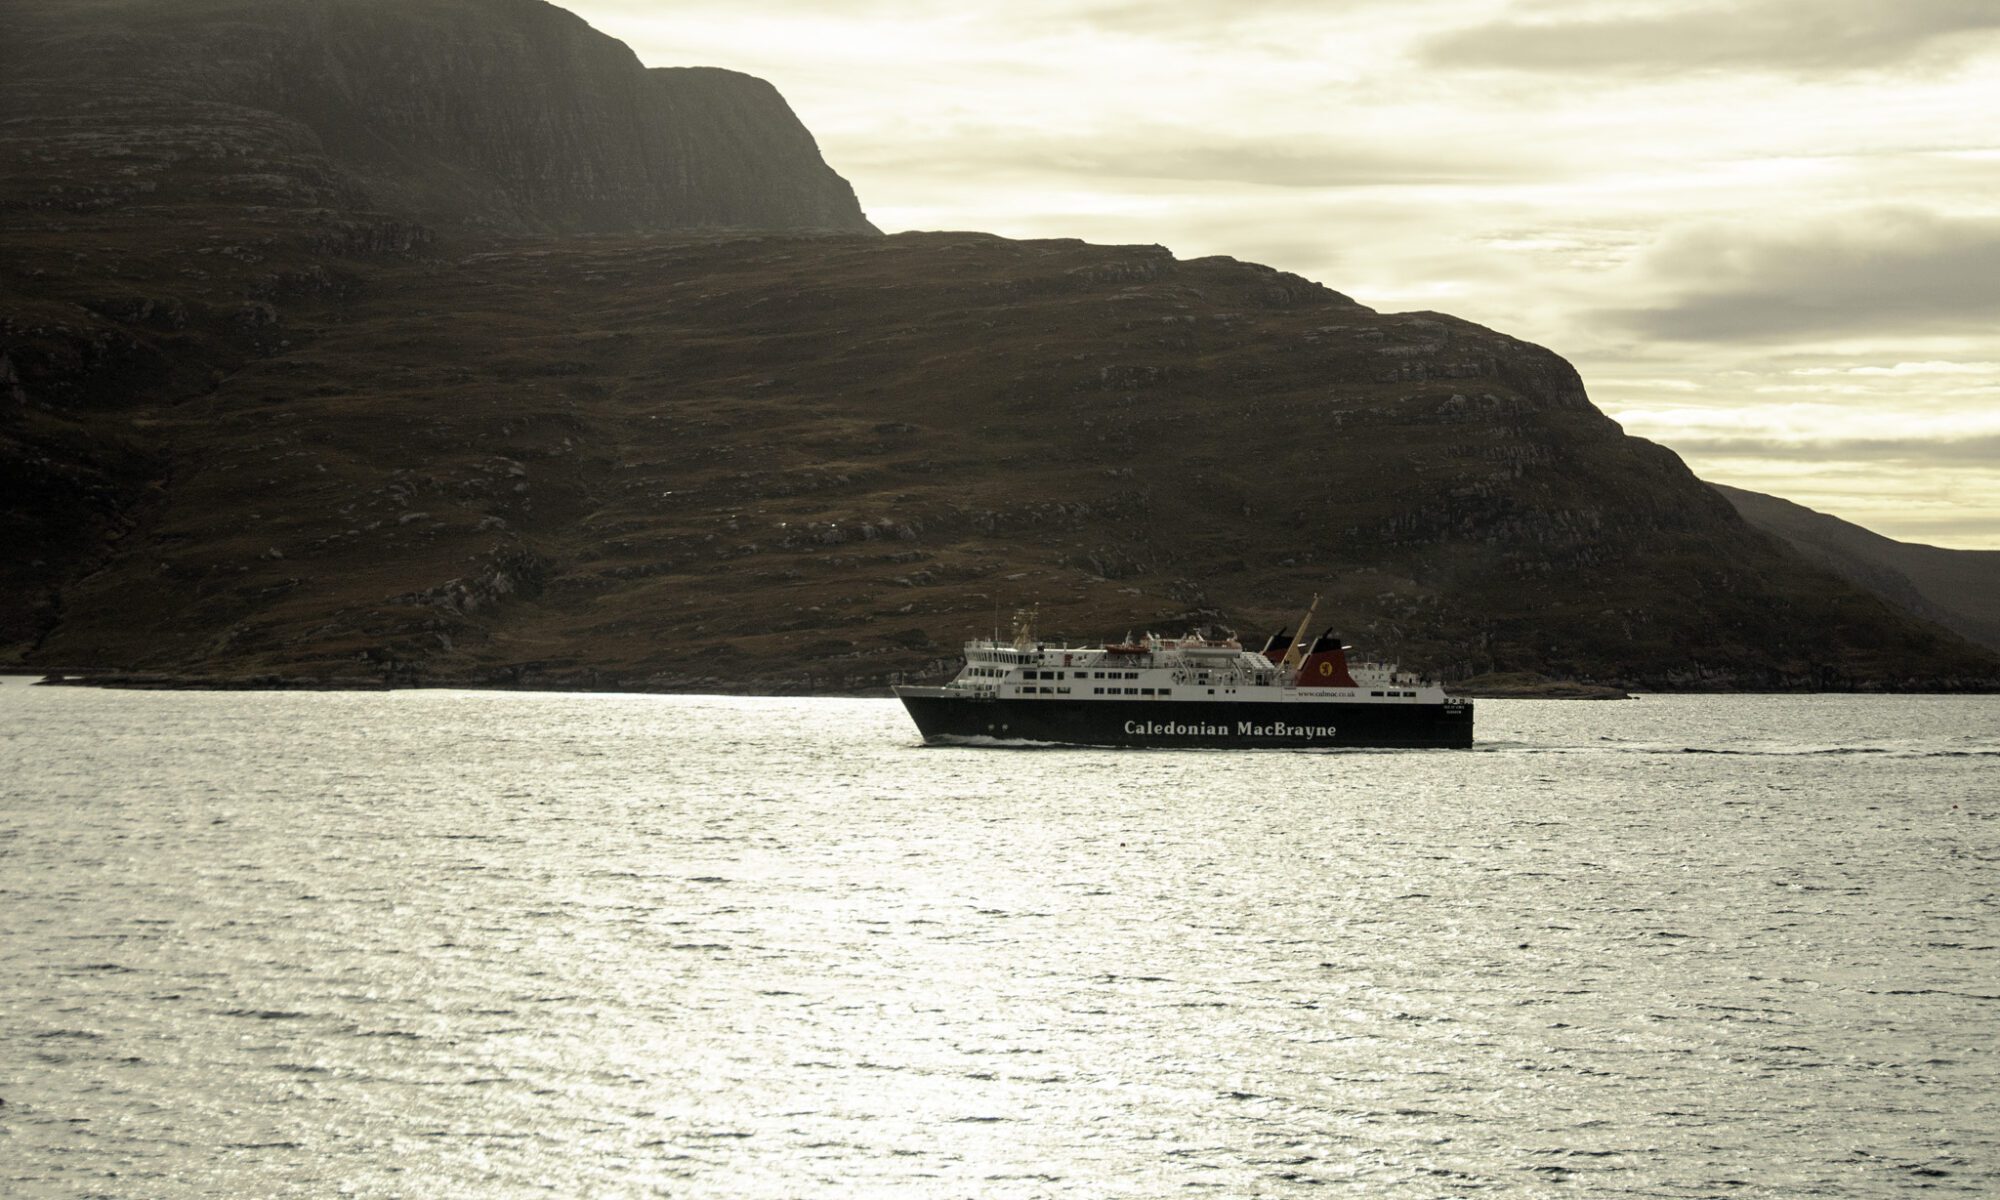 Isle of Lewis ferry from Stornoway to Ullapool near the Beinn Ghobhlach